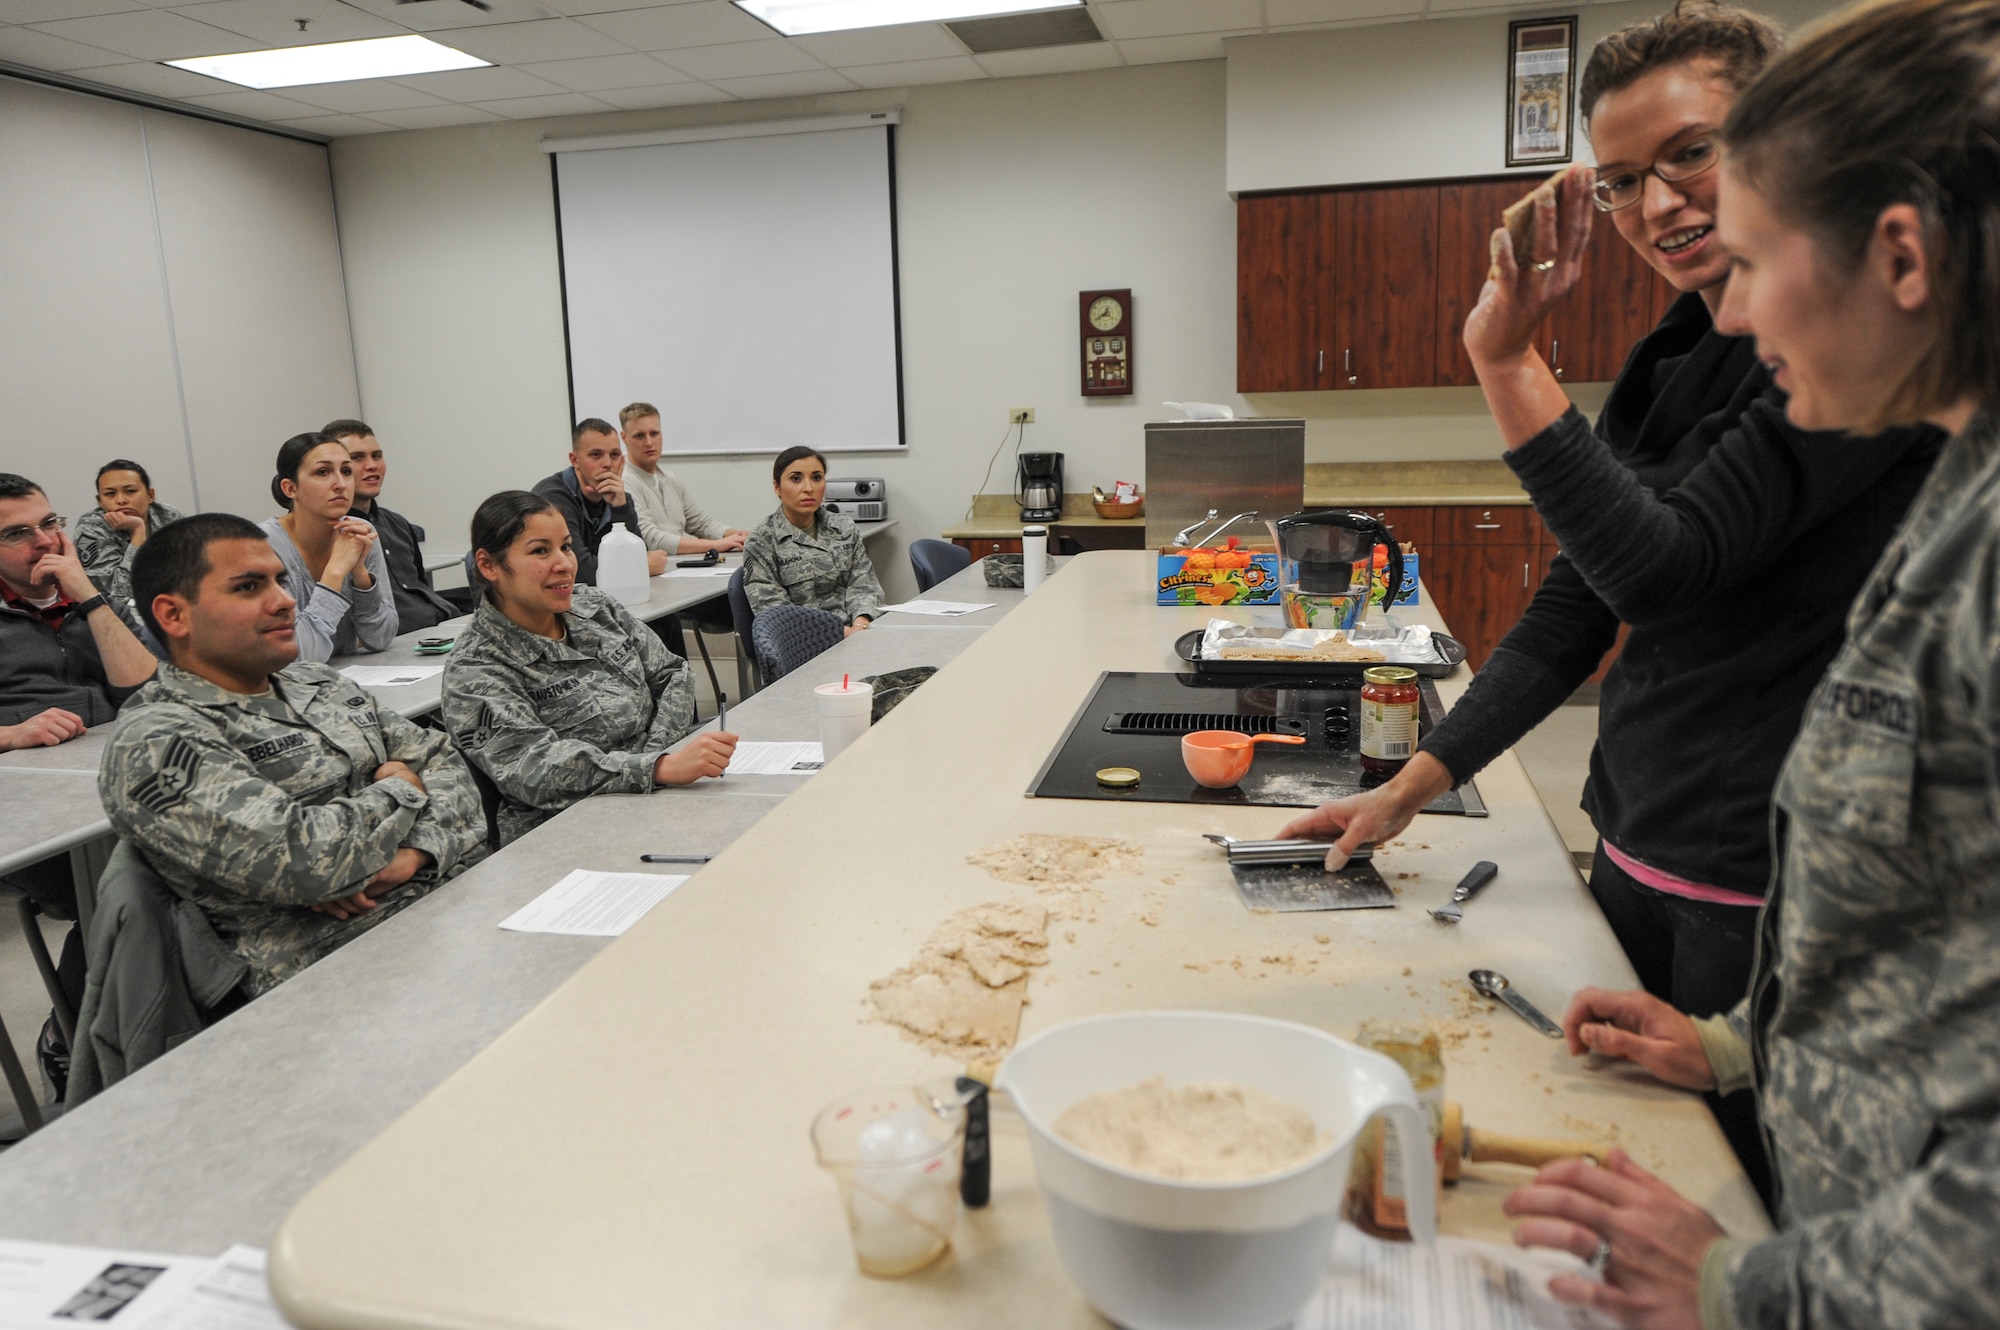 Angela Peralta, Buckley Health and Wellness Center registered dietitian, standing left, and Staff Sgt. Tonya Woosley, Air Reserve Personnel Center, standing right, demonstrate how to make pastries during a healthy cooking class Jan. 17, 2014, at the HAWC on Buckley Air Force Base, Colo. Woosley was one of several Team Buckley members who attended the class taught by Peralta. (U.S. Air Force photo by Airman Emily Amyotte/Released)